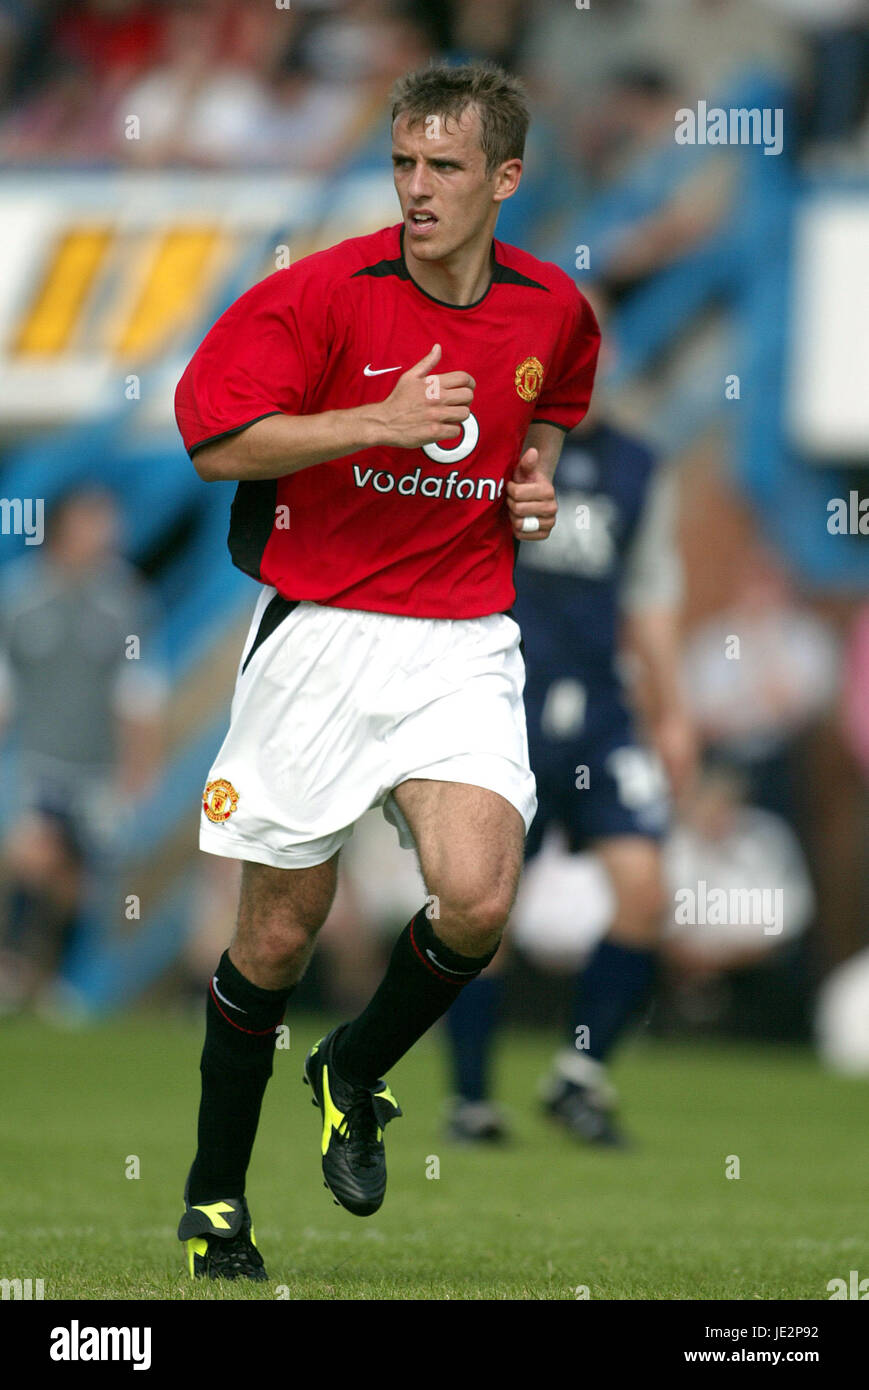 PHILIP NEVILLE MANCHESTER UNITED FC SALTERGATE CHESTERFIELD ANGLETERRE 26 Juillet 2002 Banque D'Images